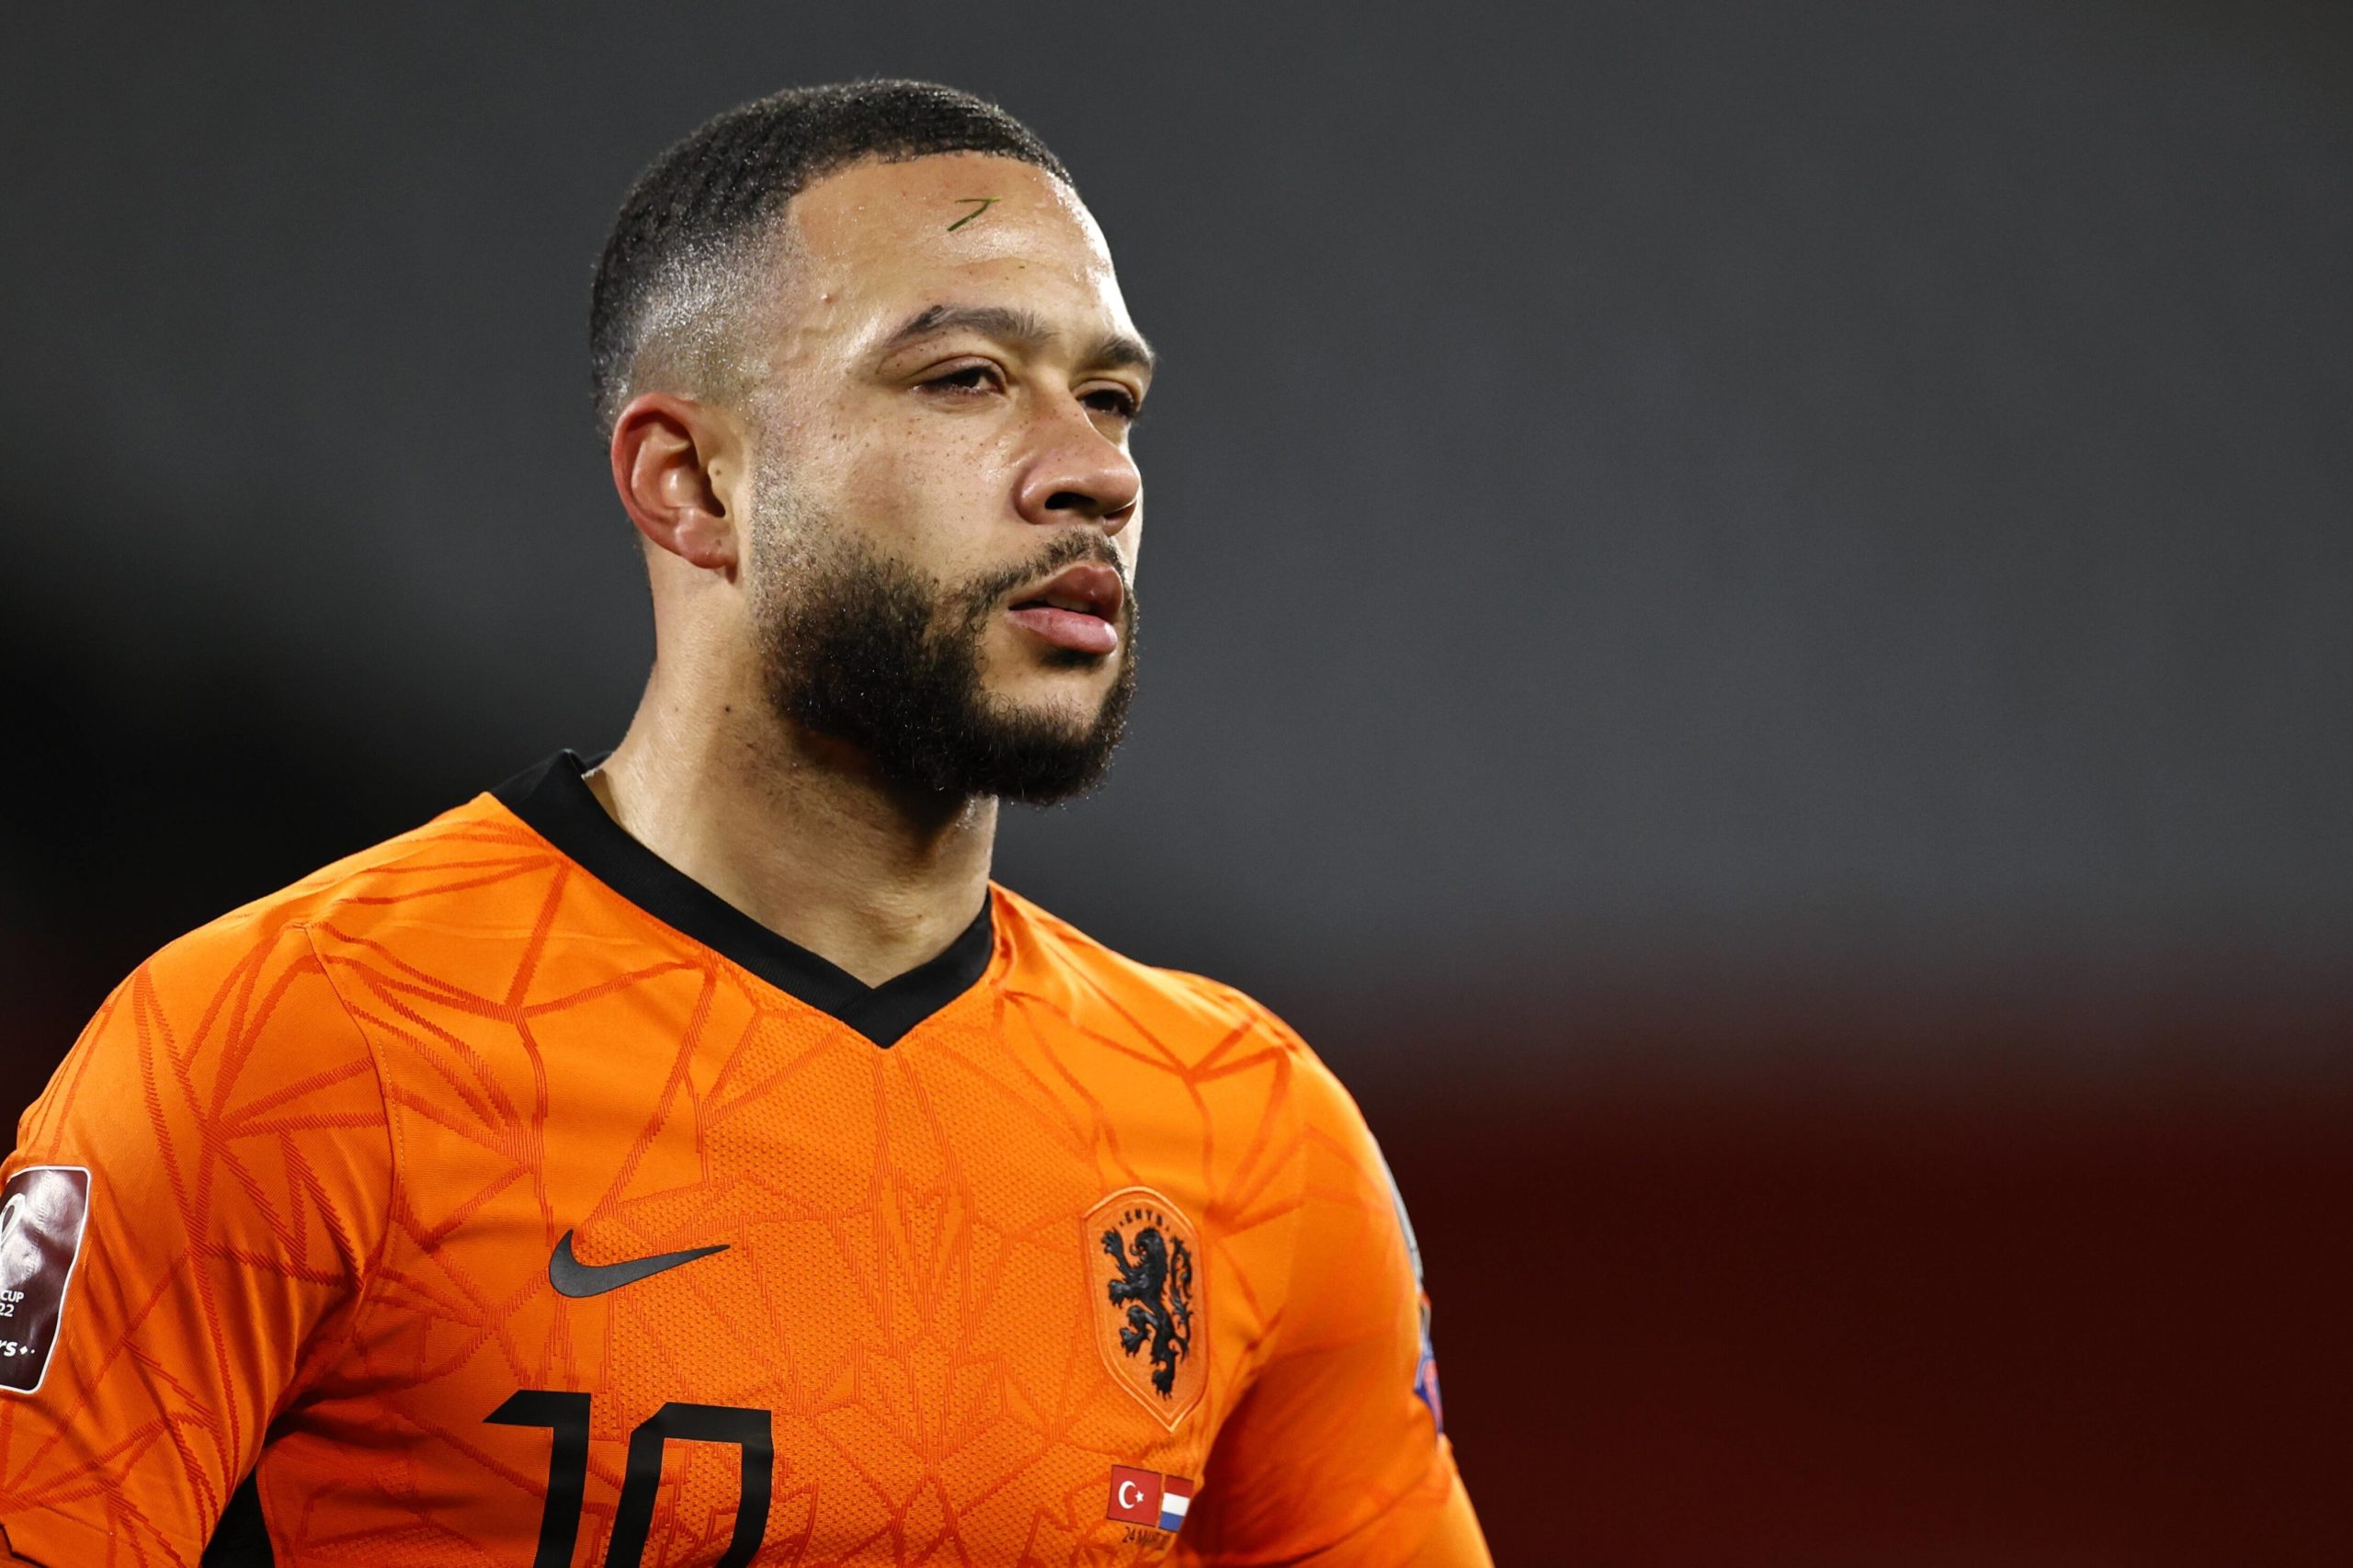 Update on Barcelona's pursuit of Depay who is seen in the photo